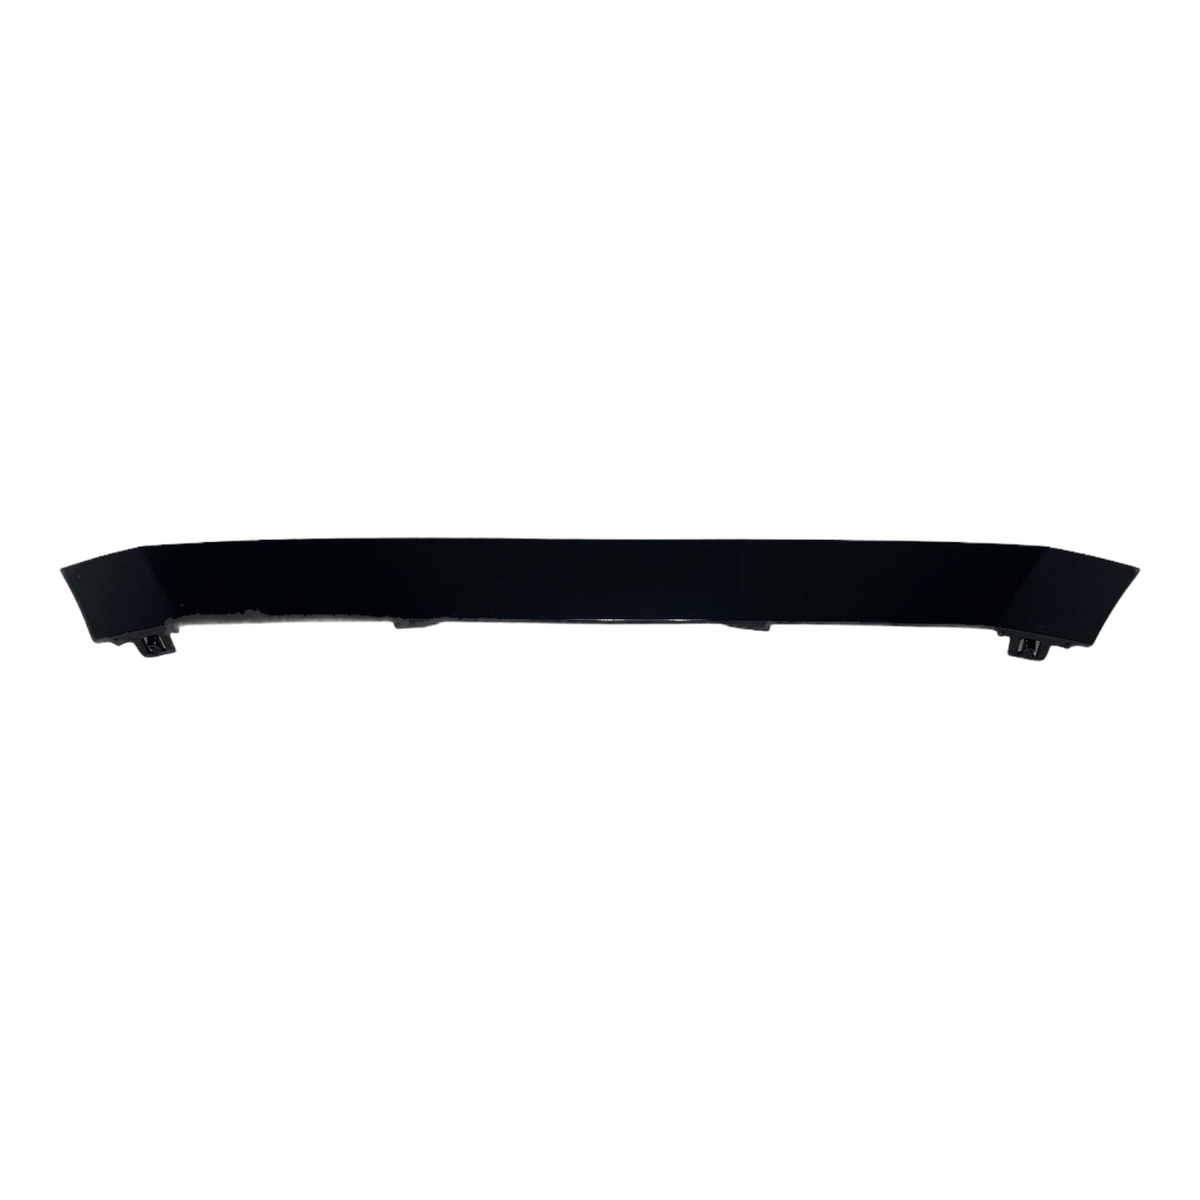 2020 2021 2022 Toyota Corolla XSE SE Front Bumper Cover Grille Molding ...